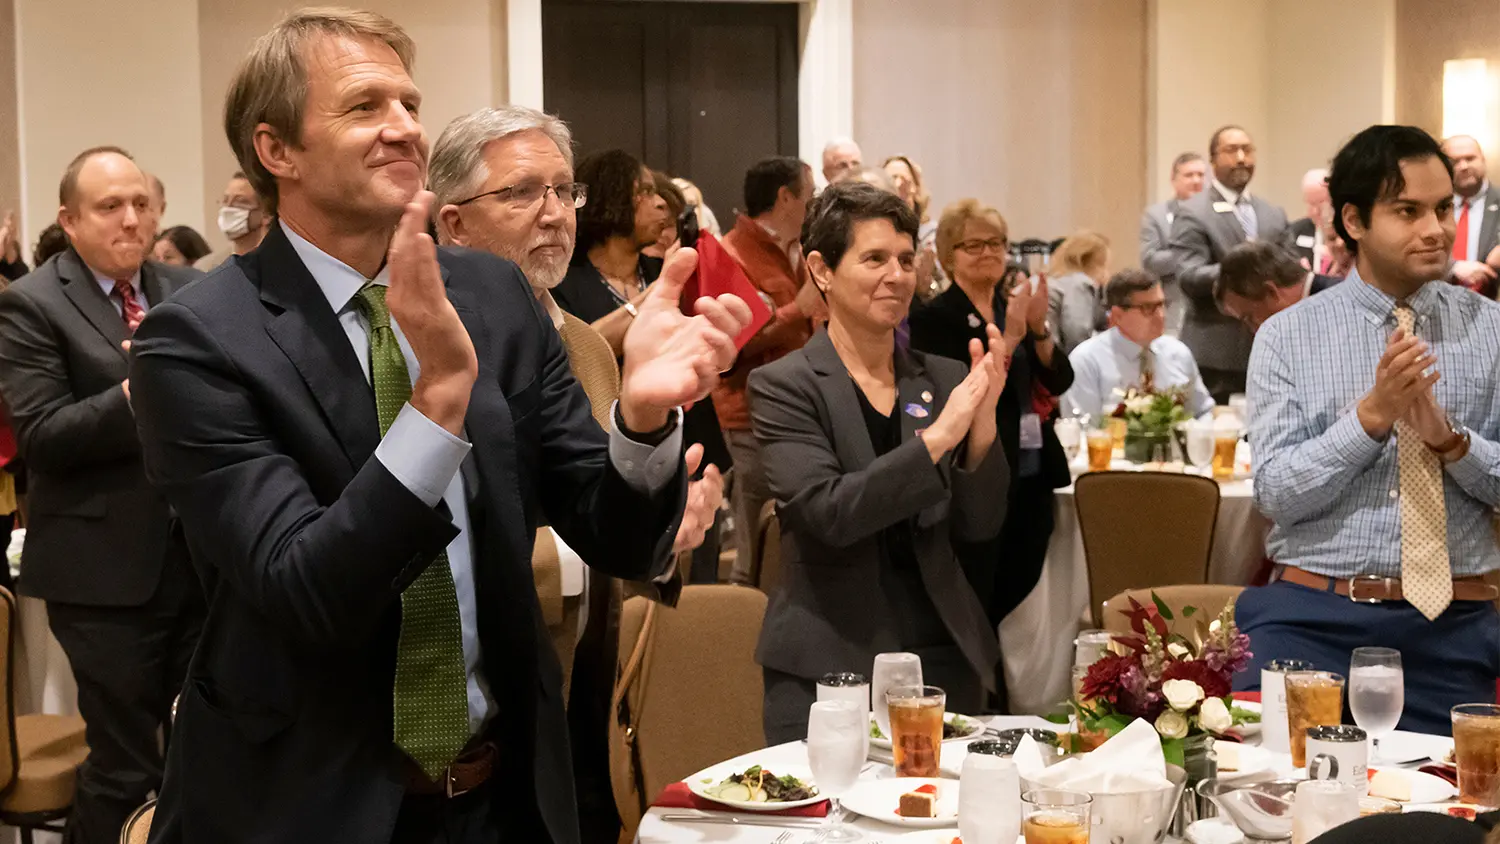 Members of the College of Education at NC State applaud during an event.